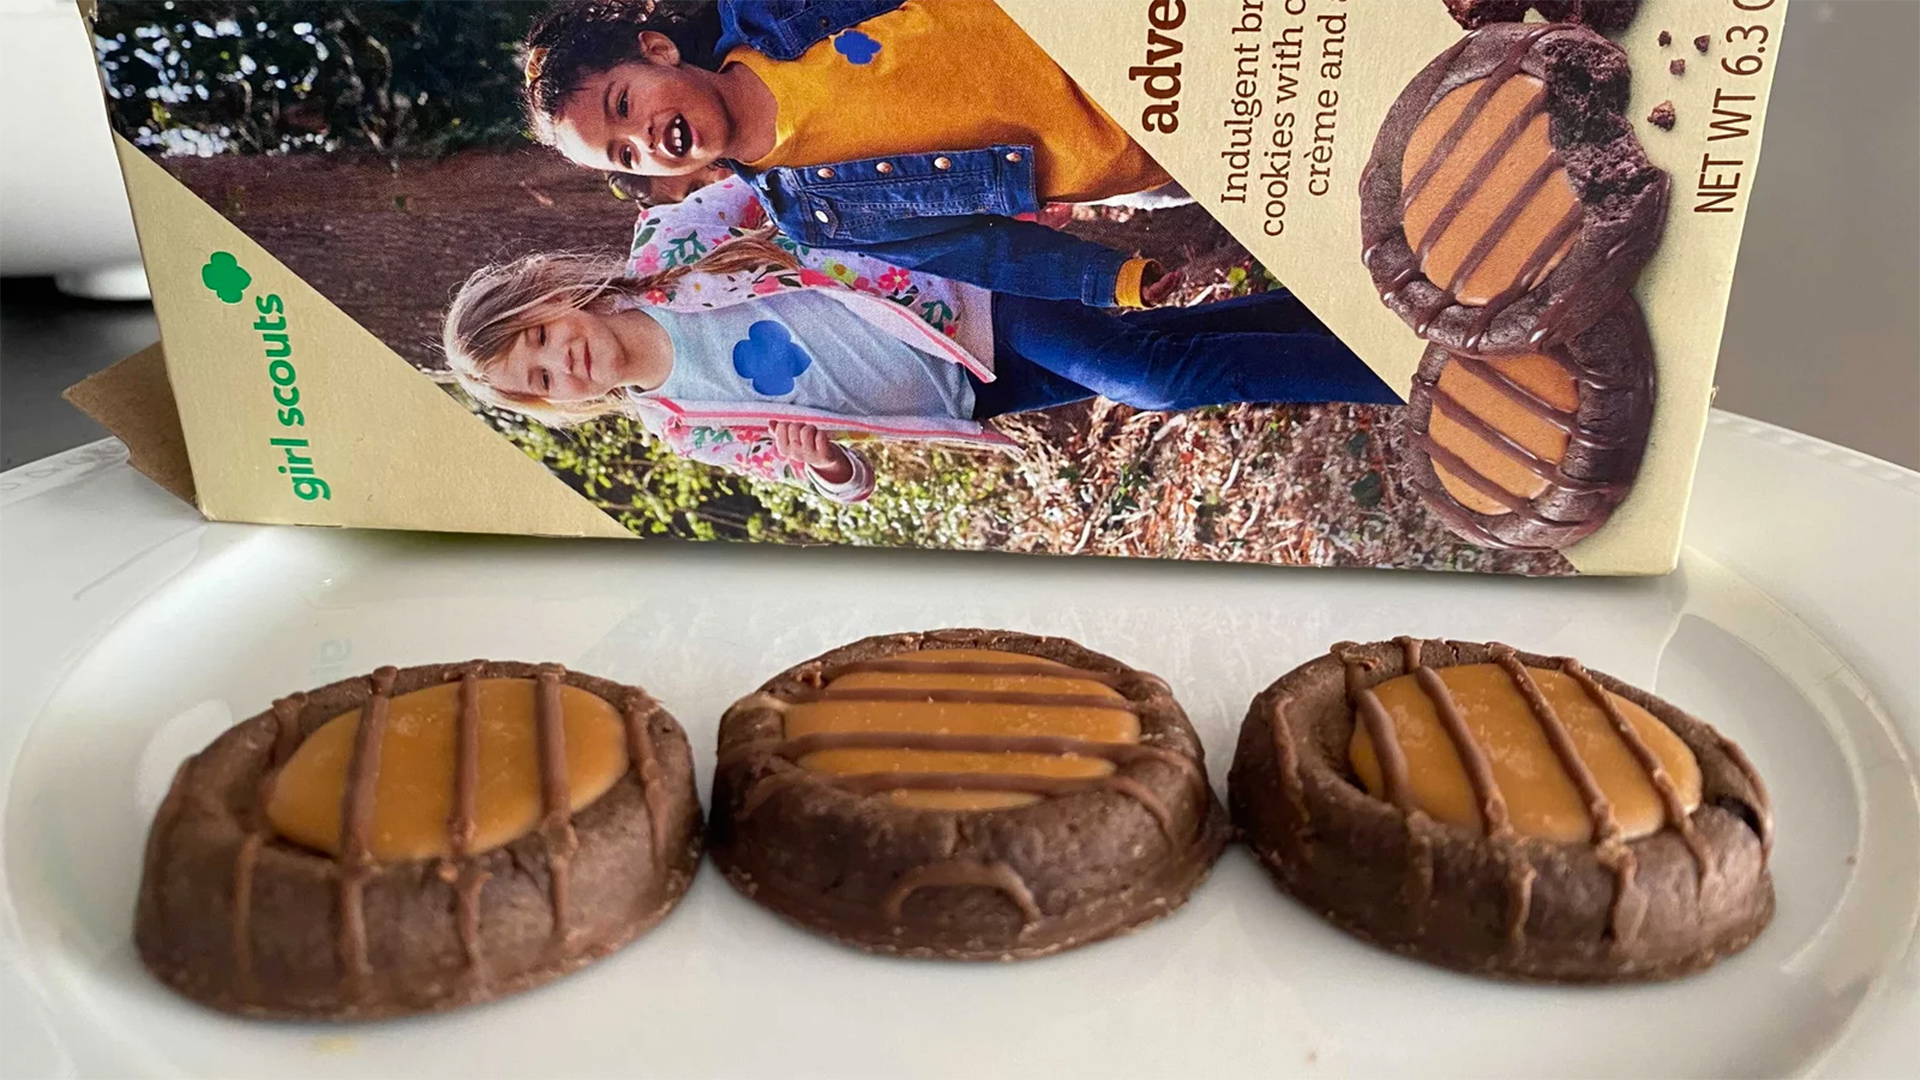 The newest Girl Scout cookie, Adventurefuls, has fallen victim to supply chain and labor disruptions. The brownie-inspired treat features a caramel-flavored creme and a dash of sea salt.